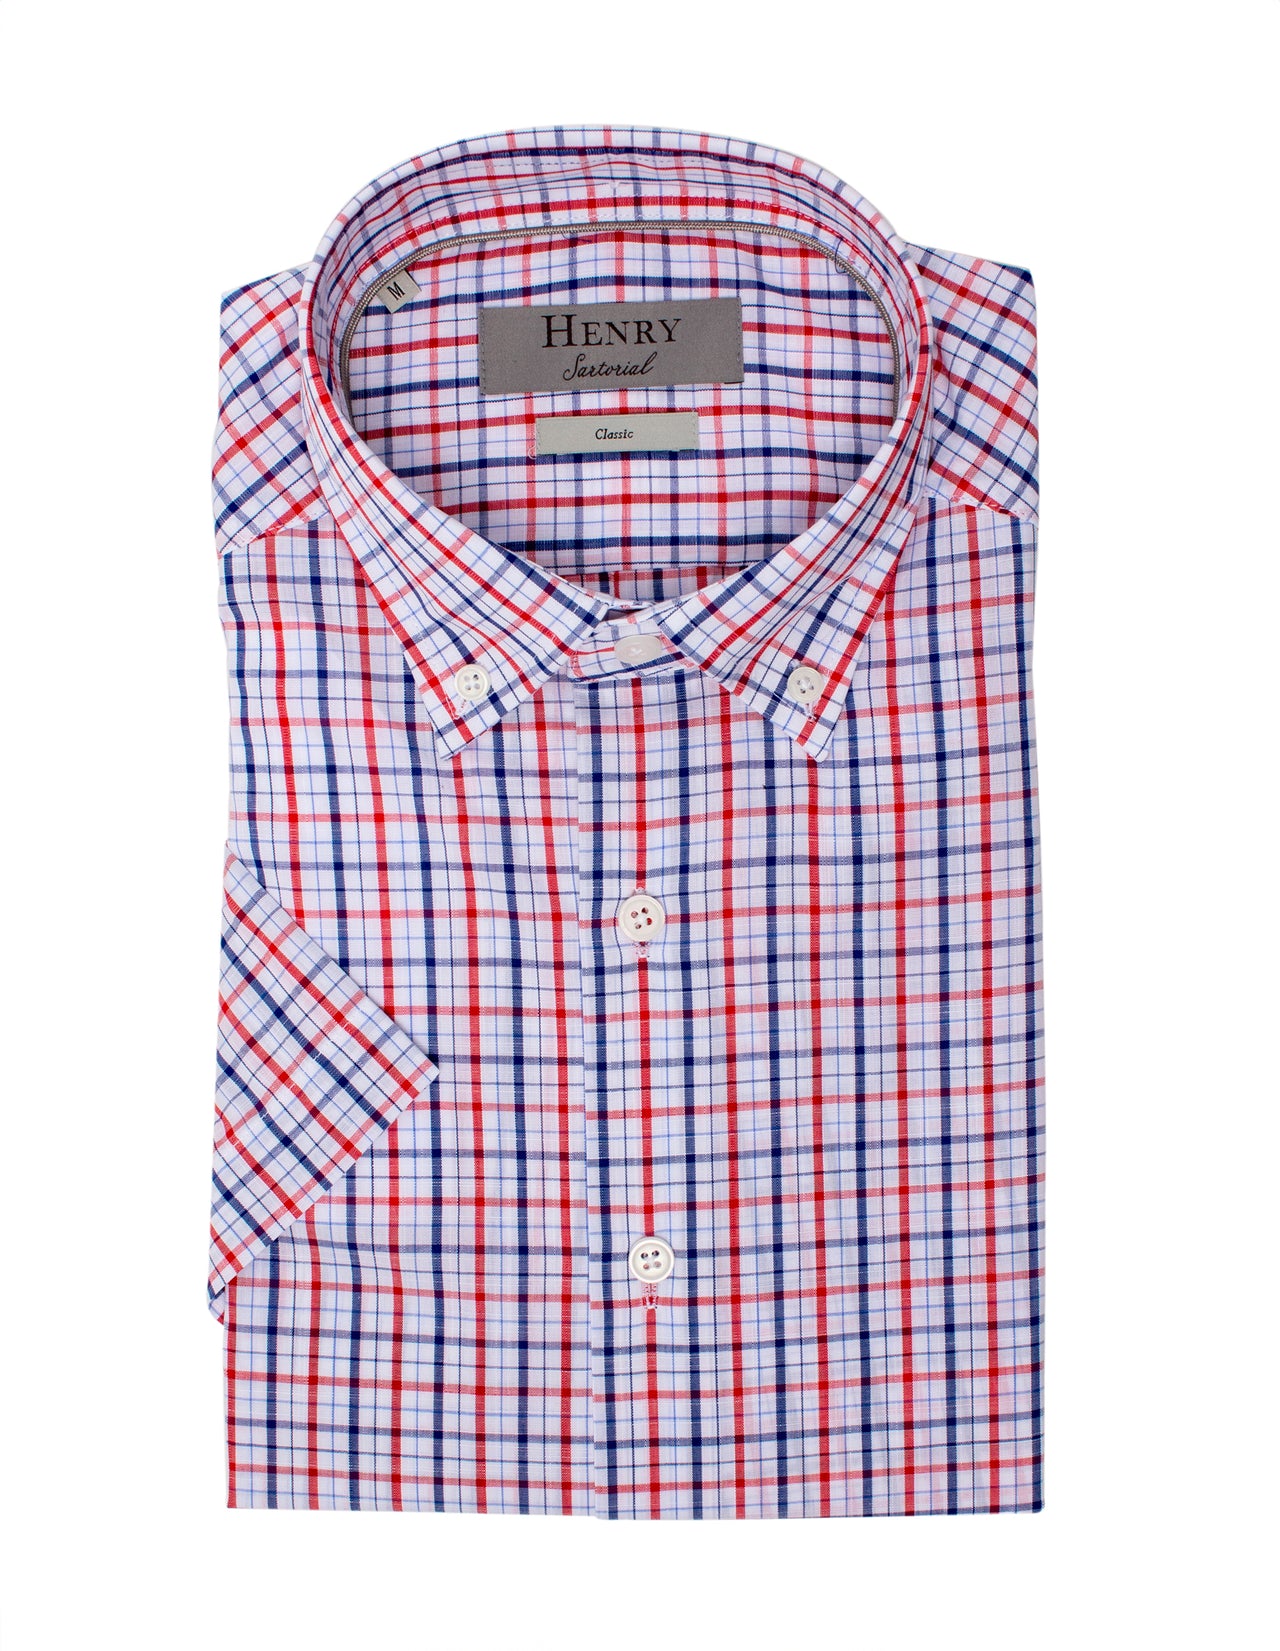 HENRY SARTORIAL Casual Check Shirt WHITE/NAVY/RED